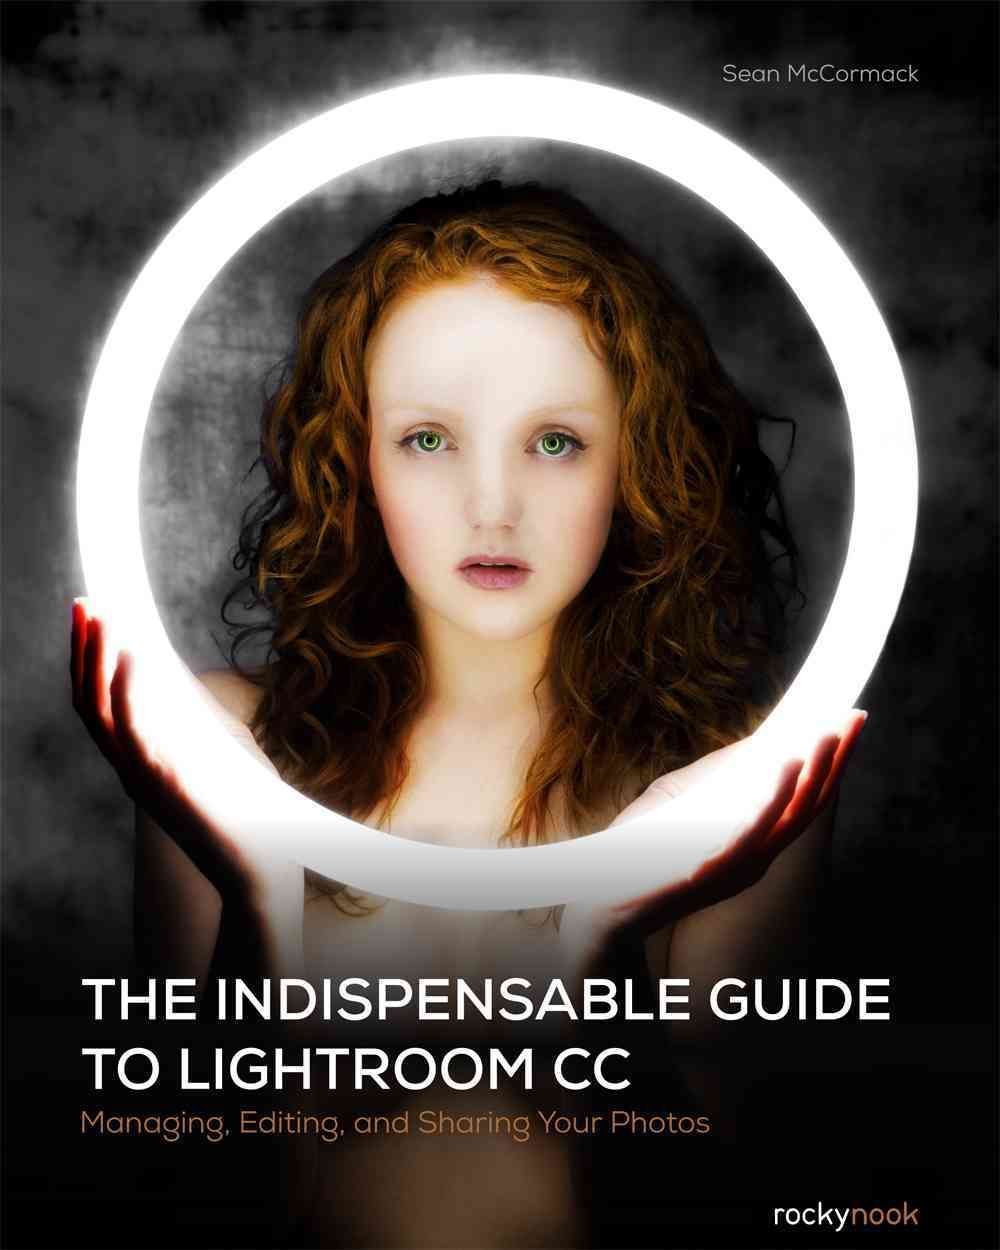 The Indispensable Guide to Lightroom CC